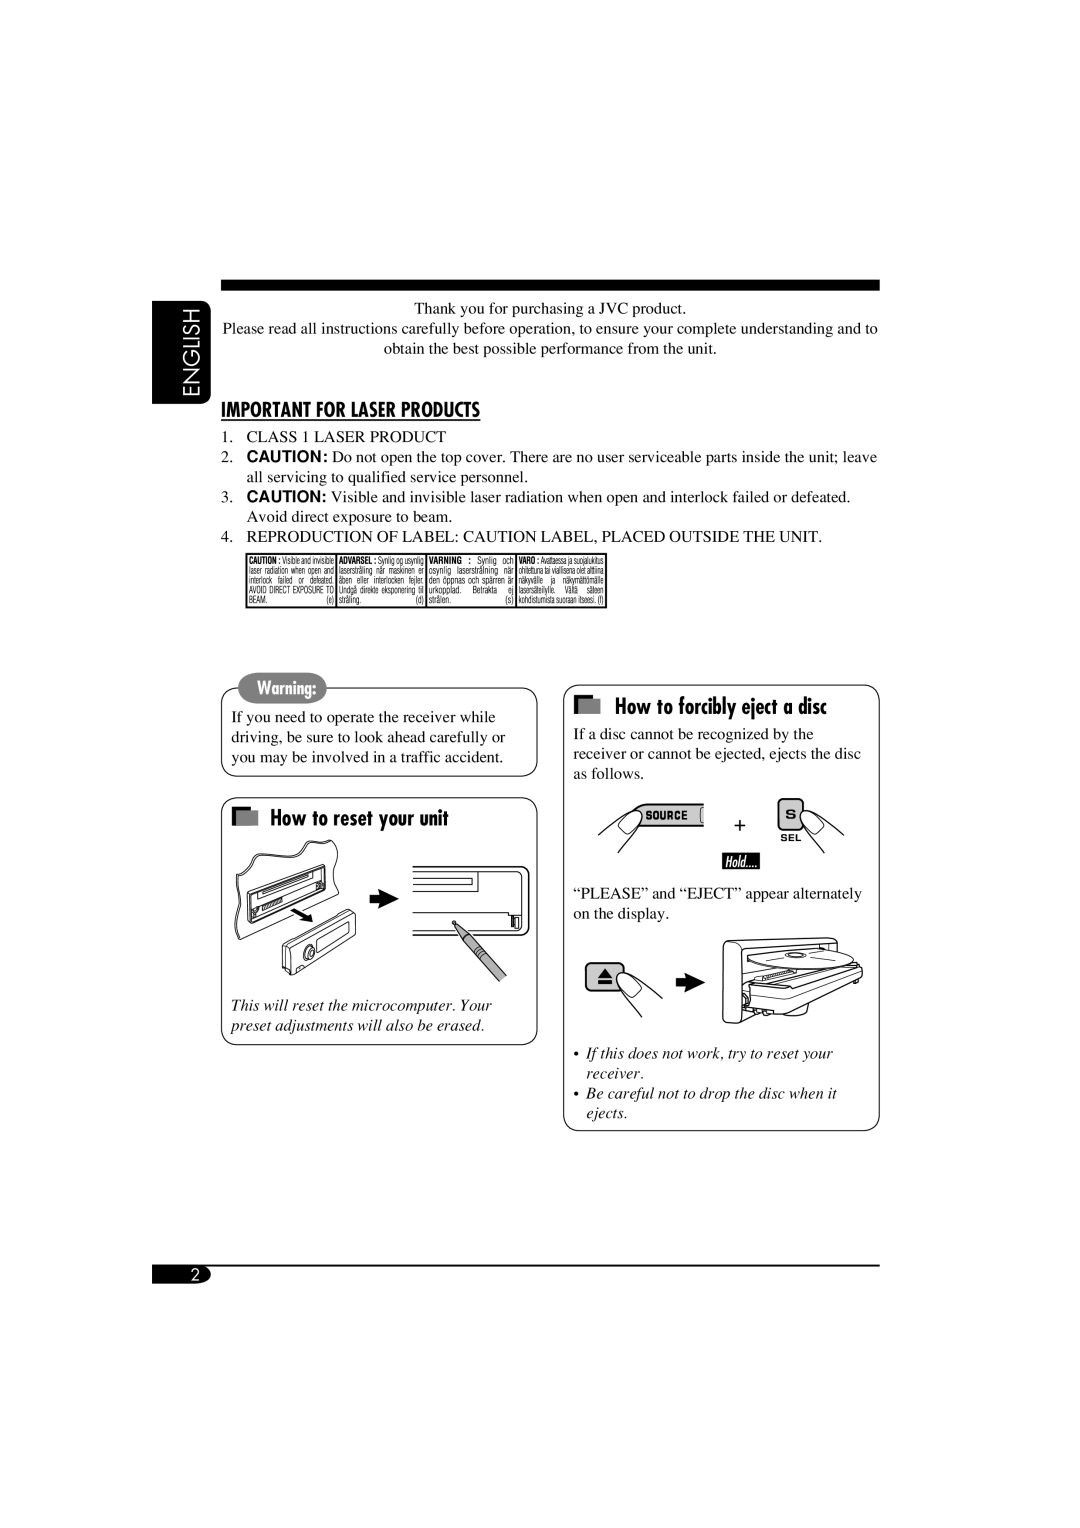 JVC KD-G515 manual How to forcibly eject a disc, How to reset your unit, Important For Laser Products, English 